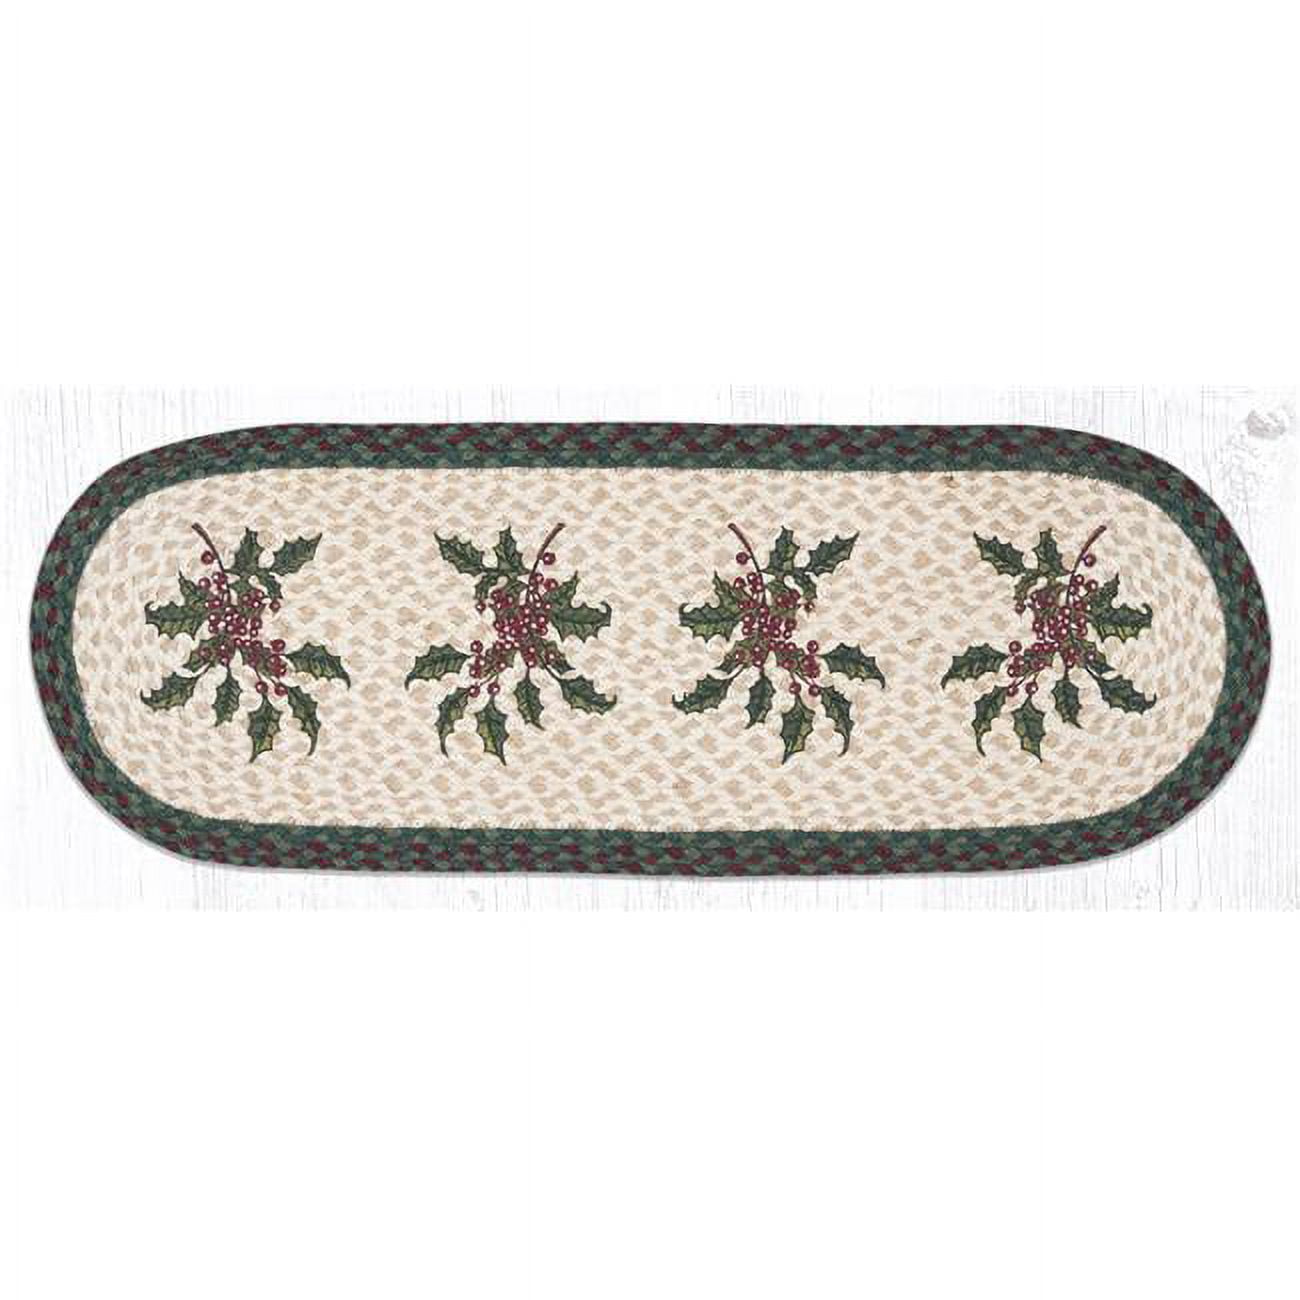 Picture of Capitol Importing 68-508H 13 x 36 in. OP-508 Holly Oval Patch Runner